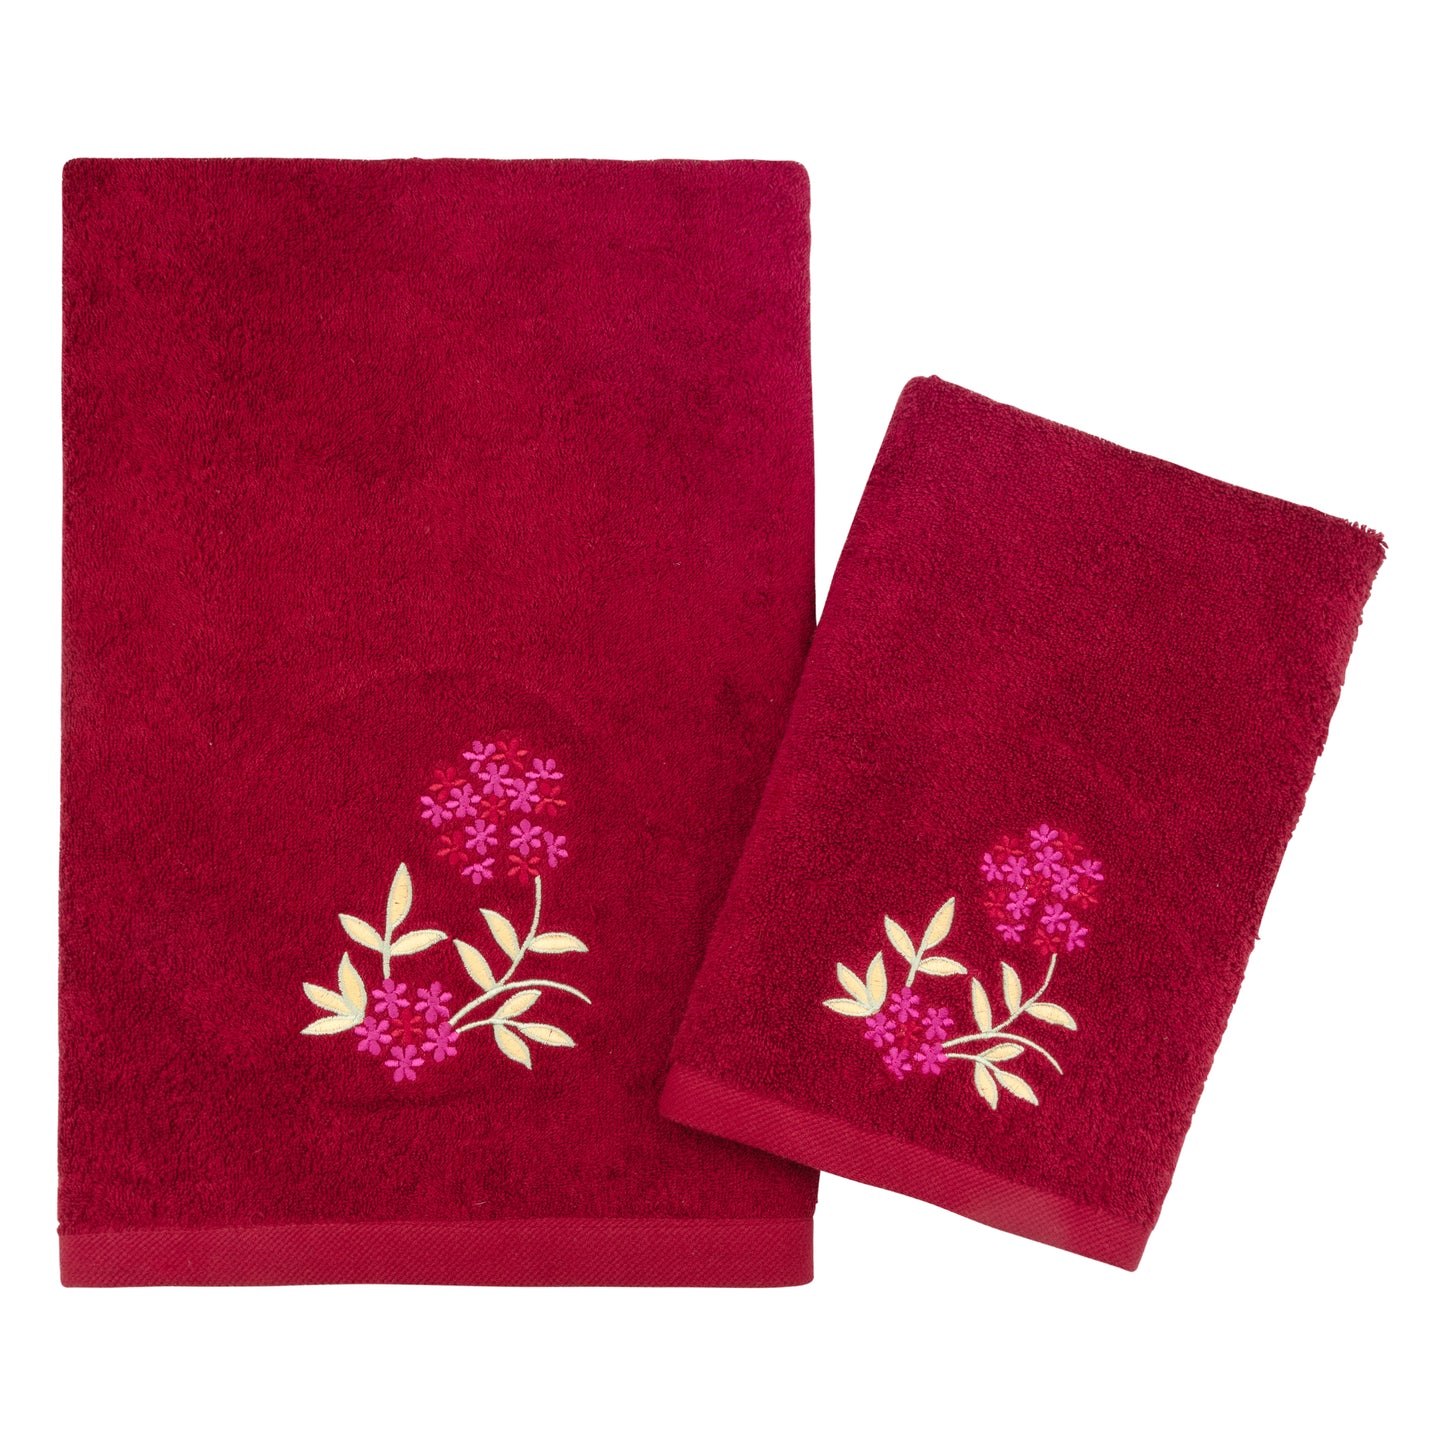 Embroidered towel rose wood, red bath, hand Terry Cotton